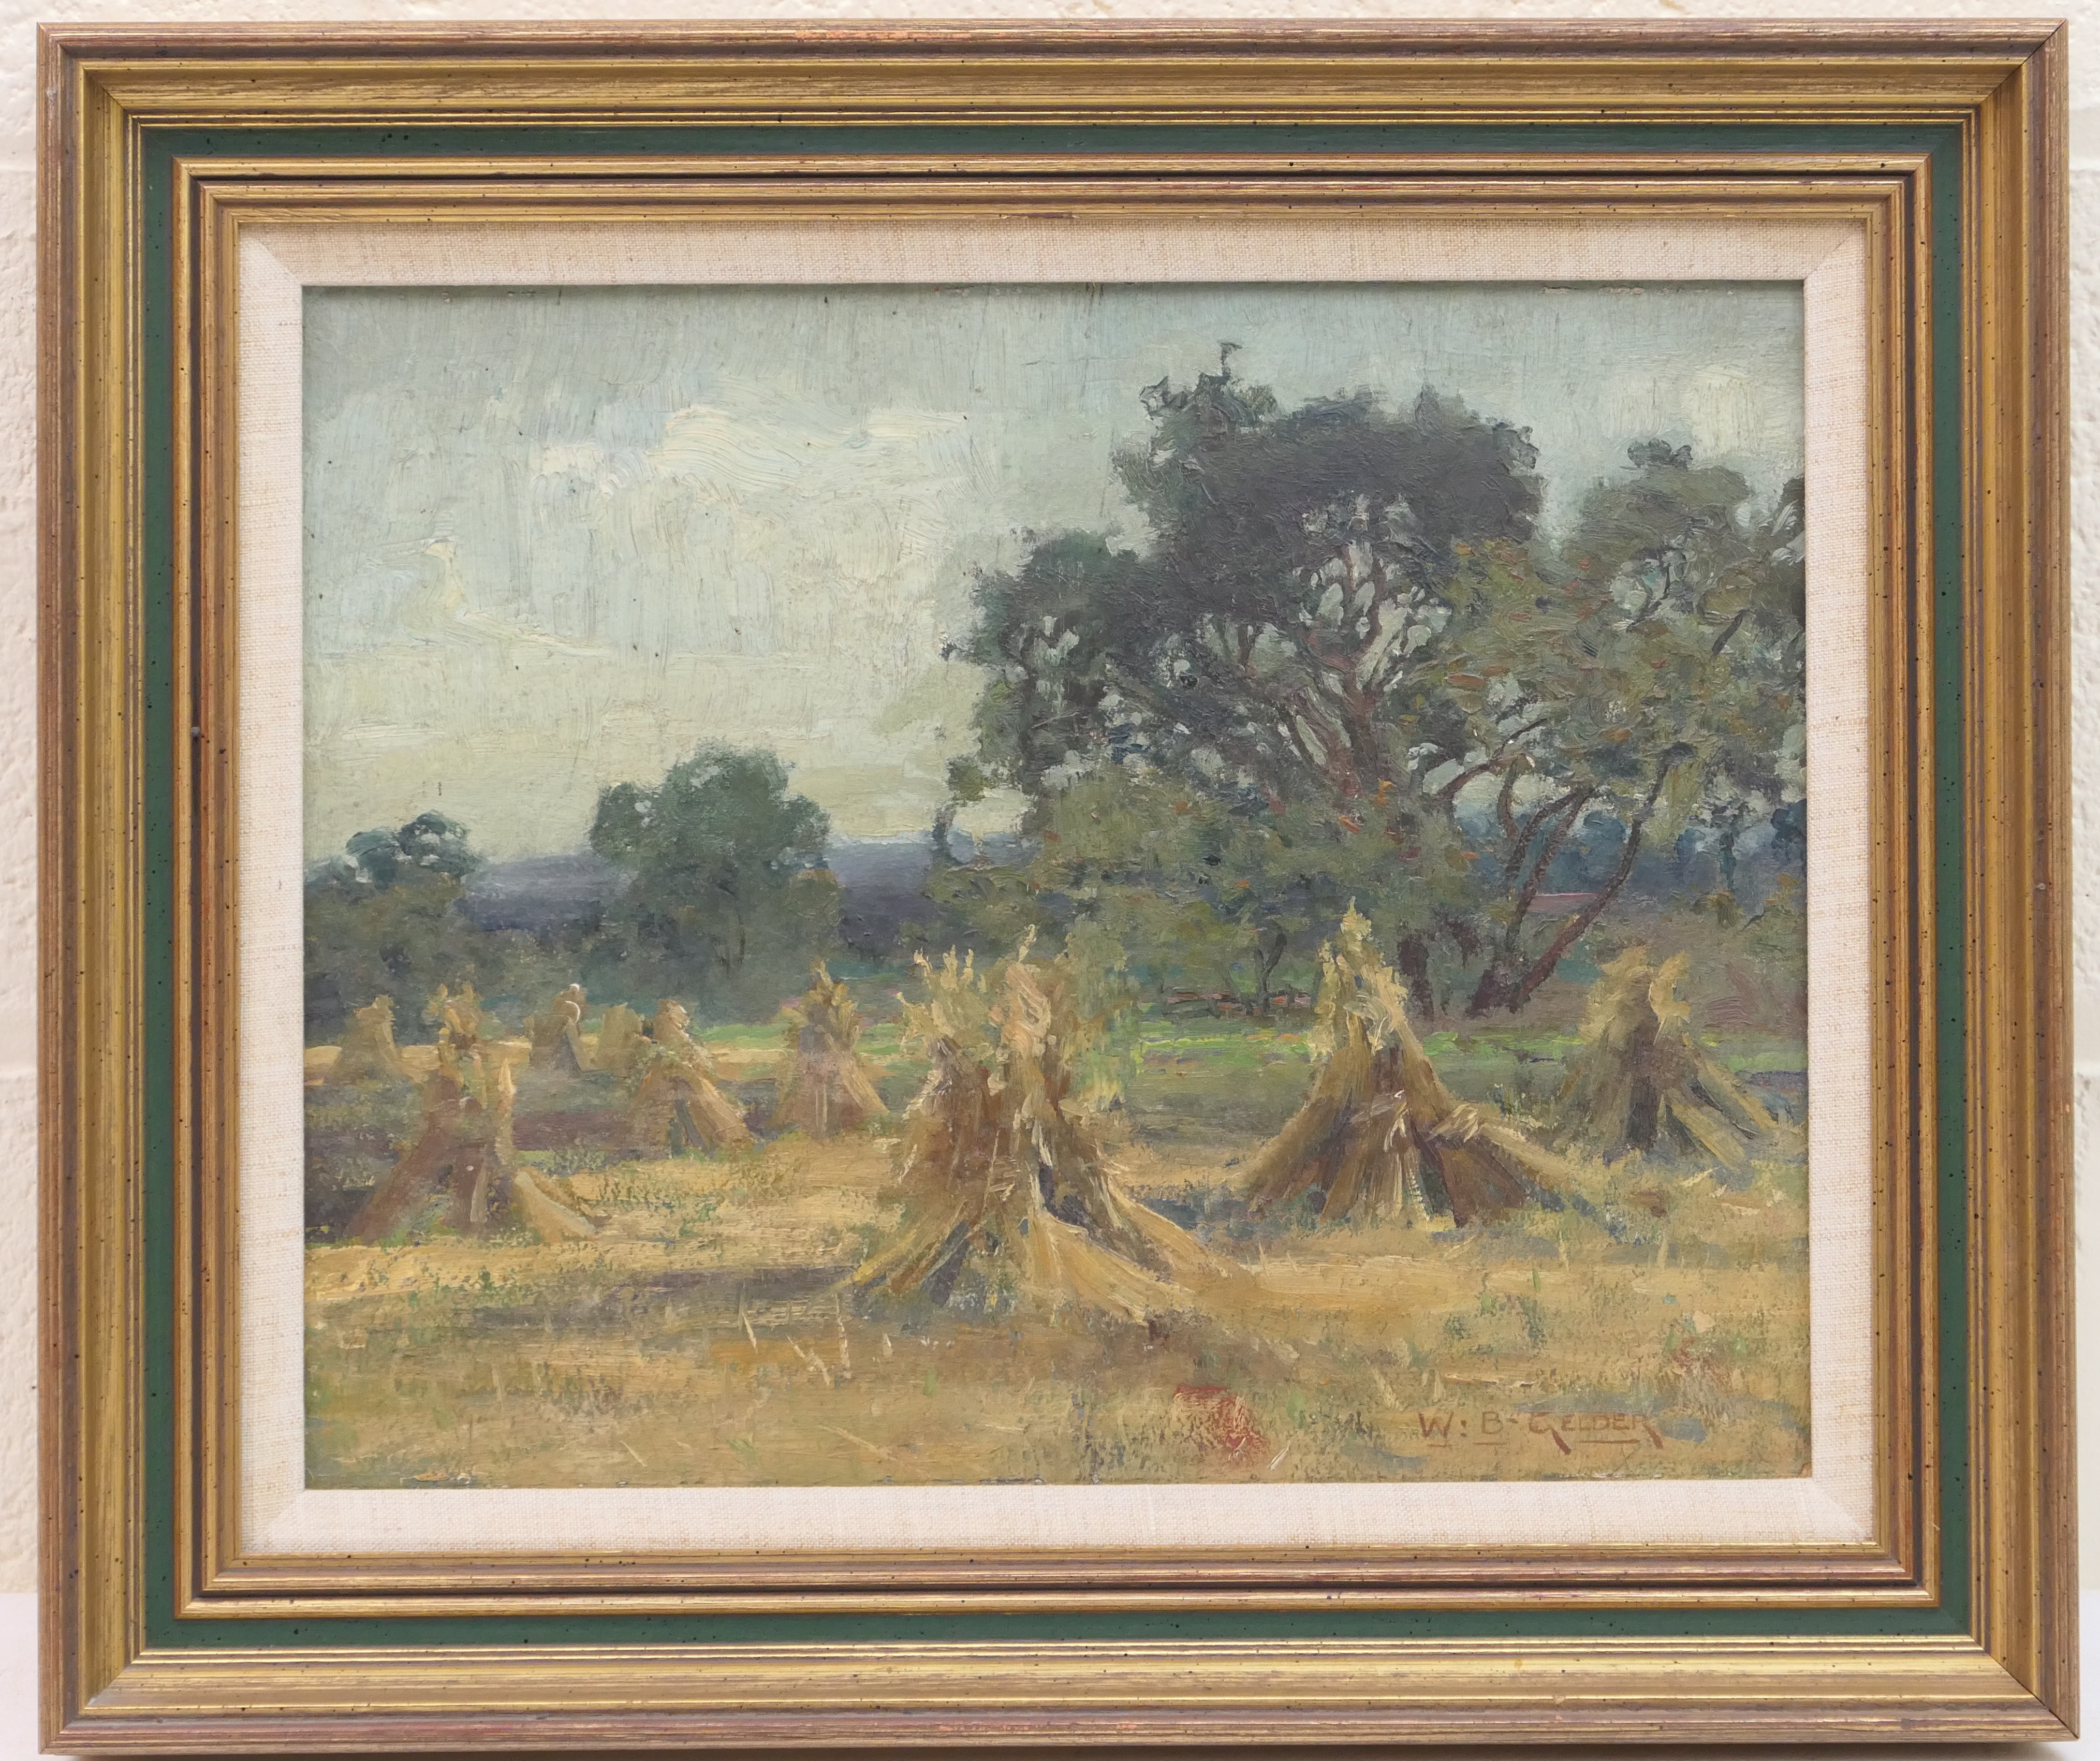 William Bagnall Gelder (late 19th/early 20th Century), Corn stooks, oil on artist's board, signed,